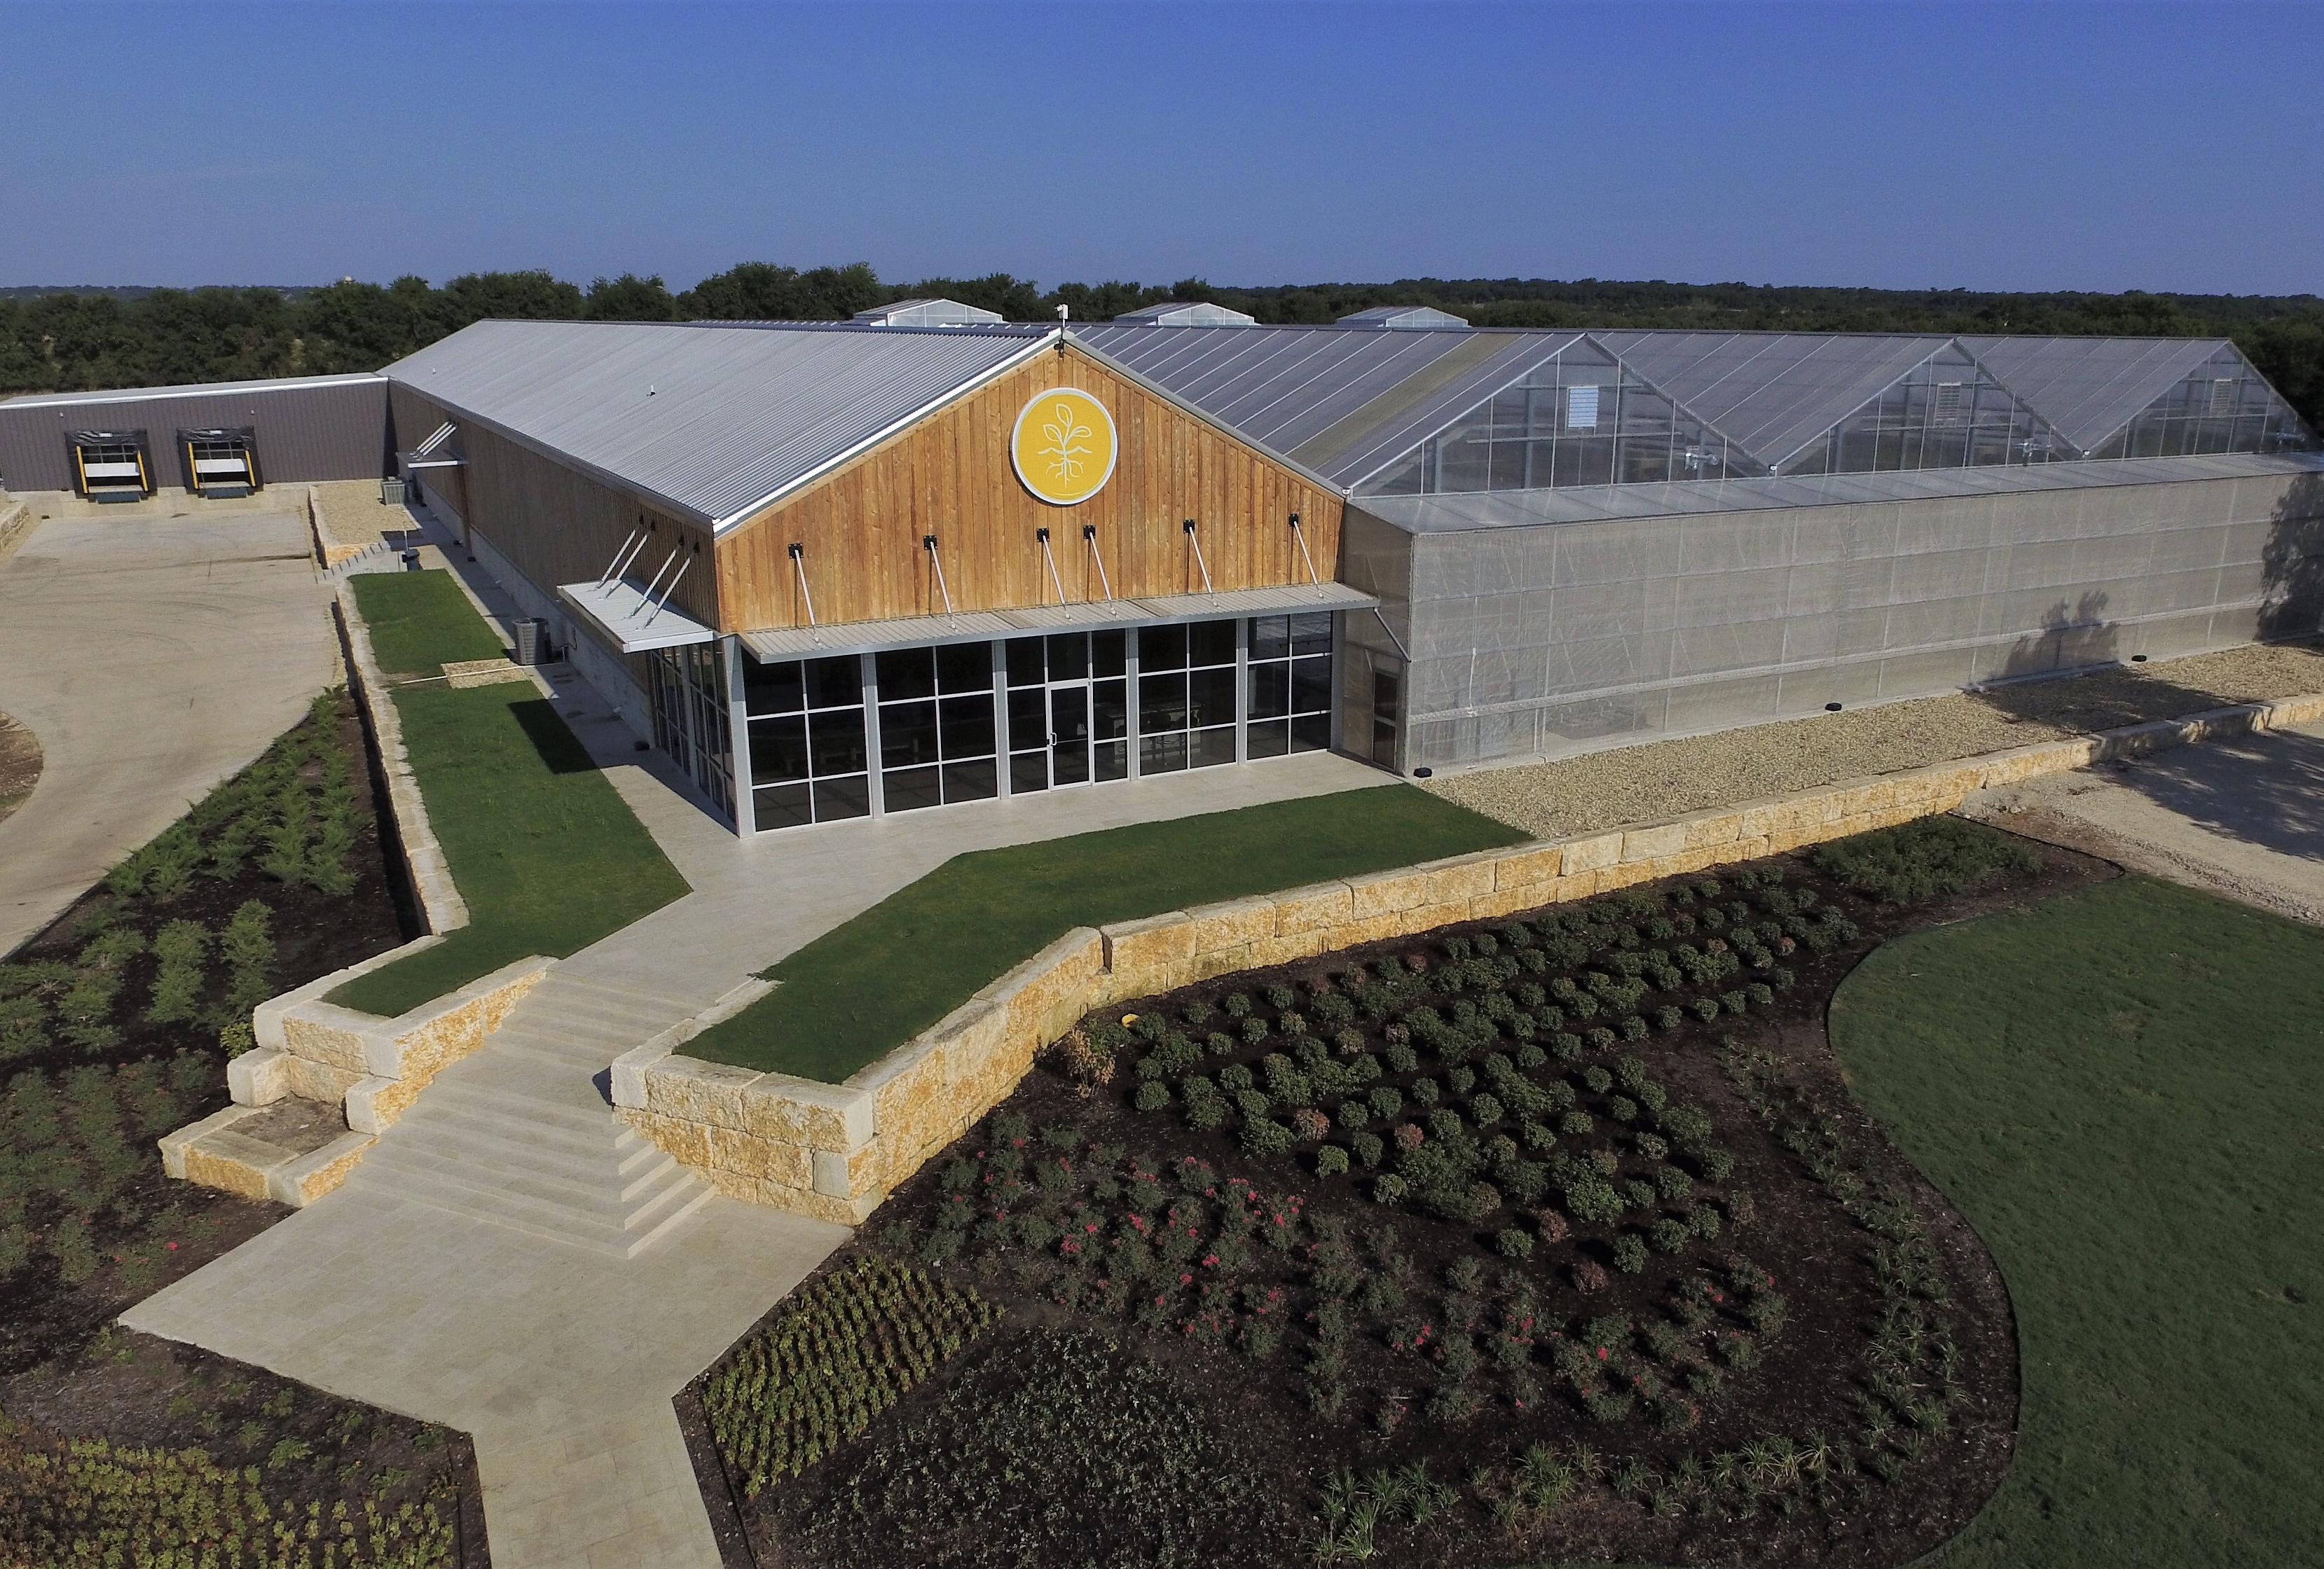 TrueHarvest Farms, rooted in Belton, TX, is ready to supply fresh, nutritious and safe leafy greens to the Texaplex Triangle.